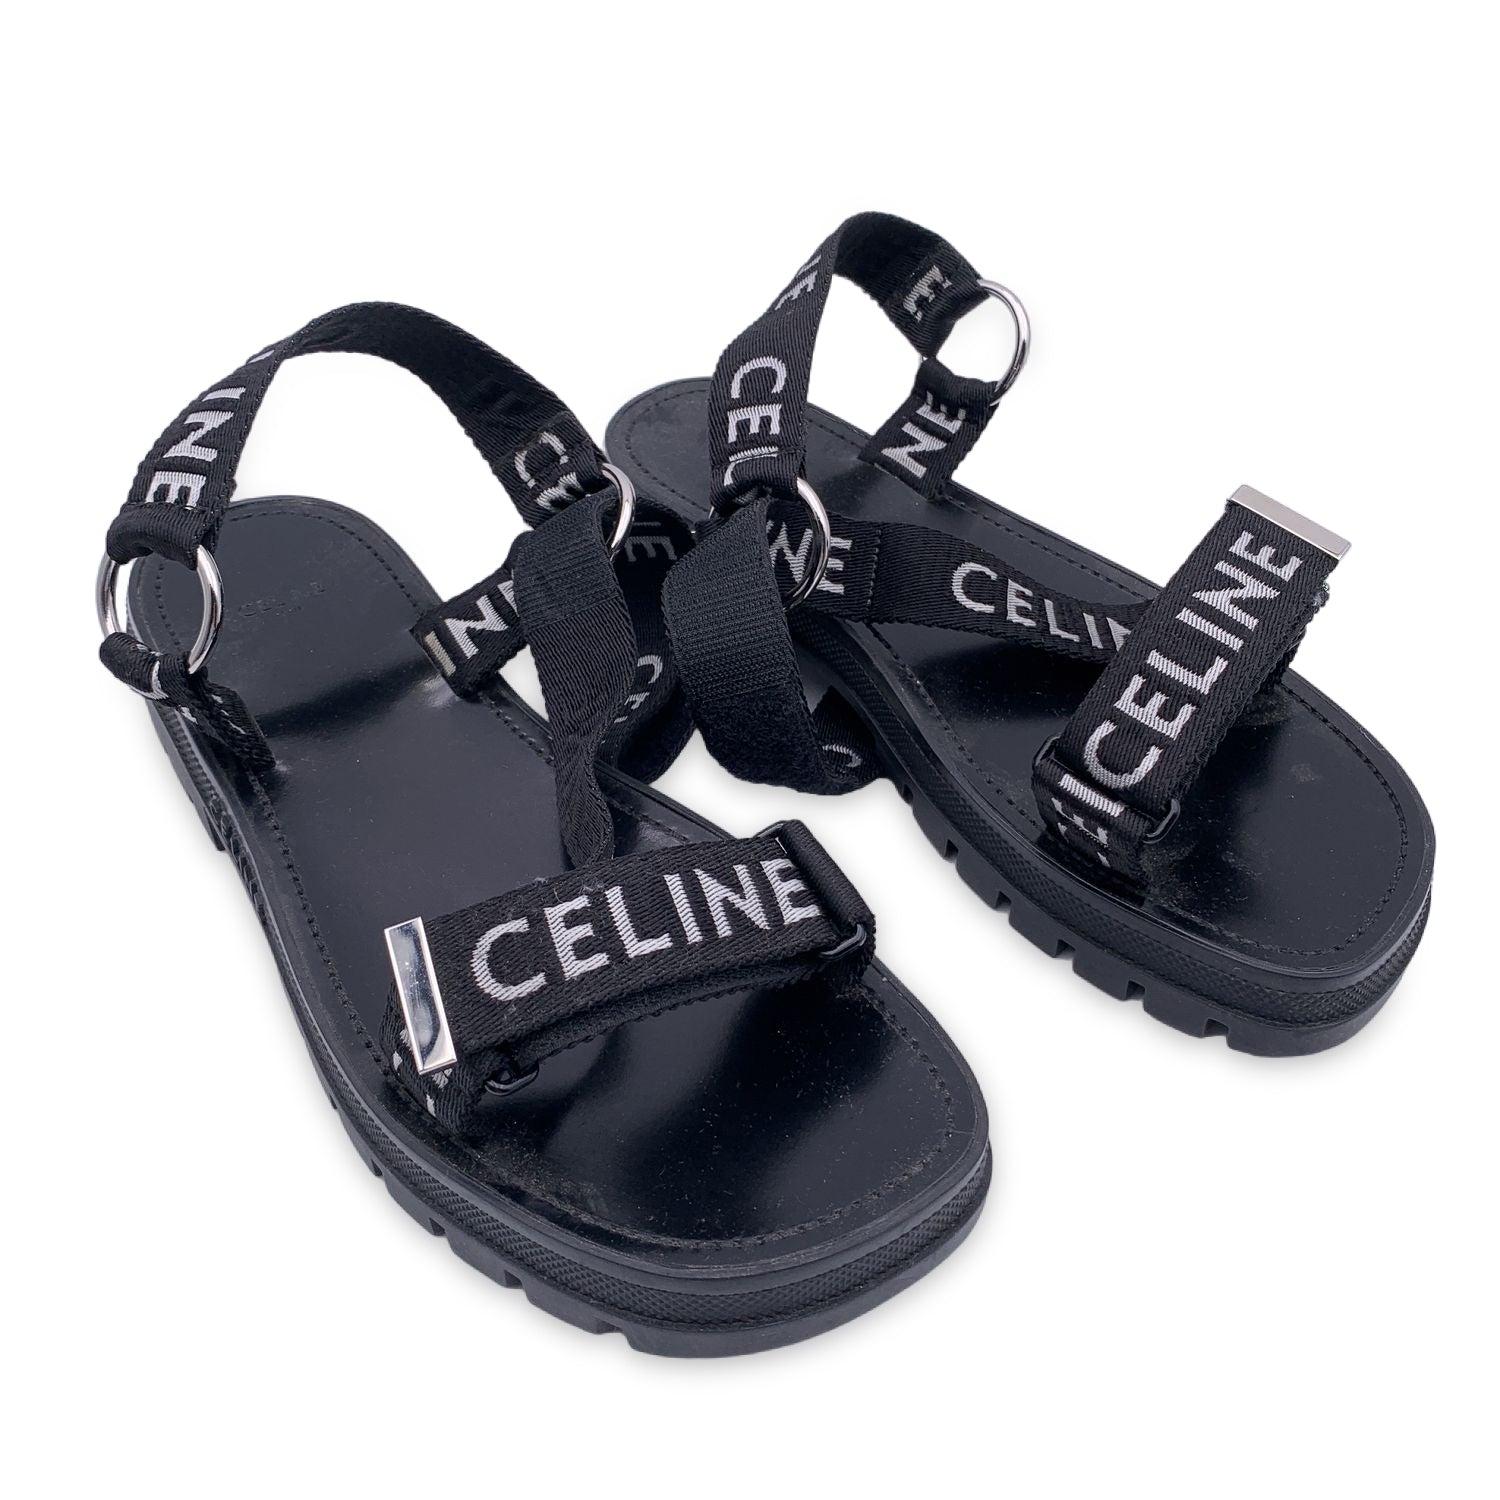 Celine 'Leo' strappy sandals in black color. Straps in fabric wth contrast 'Celine' jacquard writing. Strap with scratch to adjust the shoe onto the foot. Chunky lug rubber outsoleleather insole. Heel height : 4.5 cm / 1.8 inches. Made in Italy